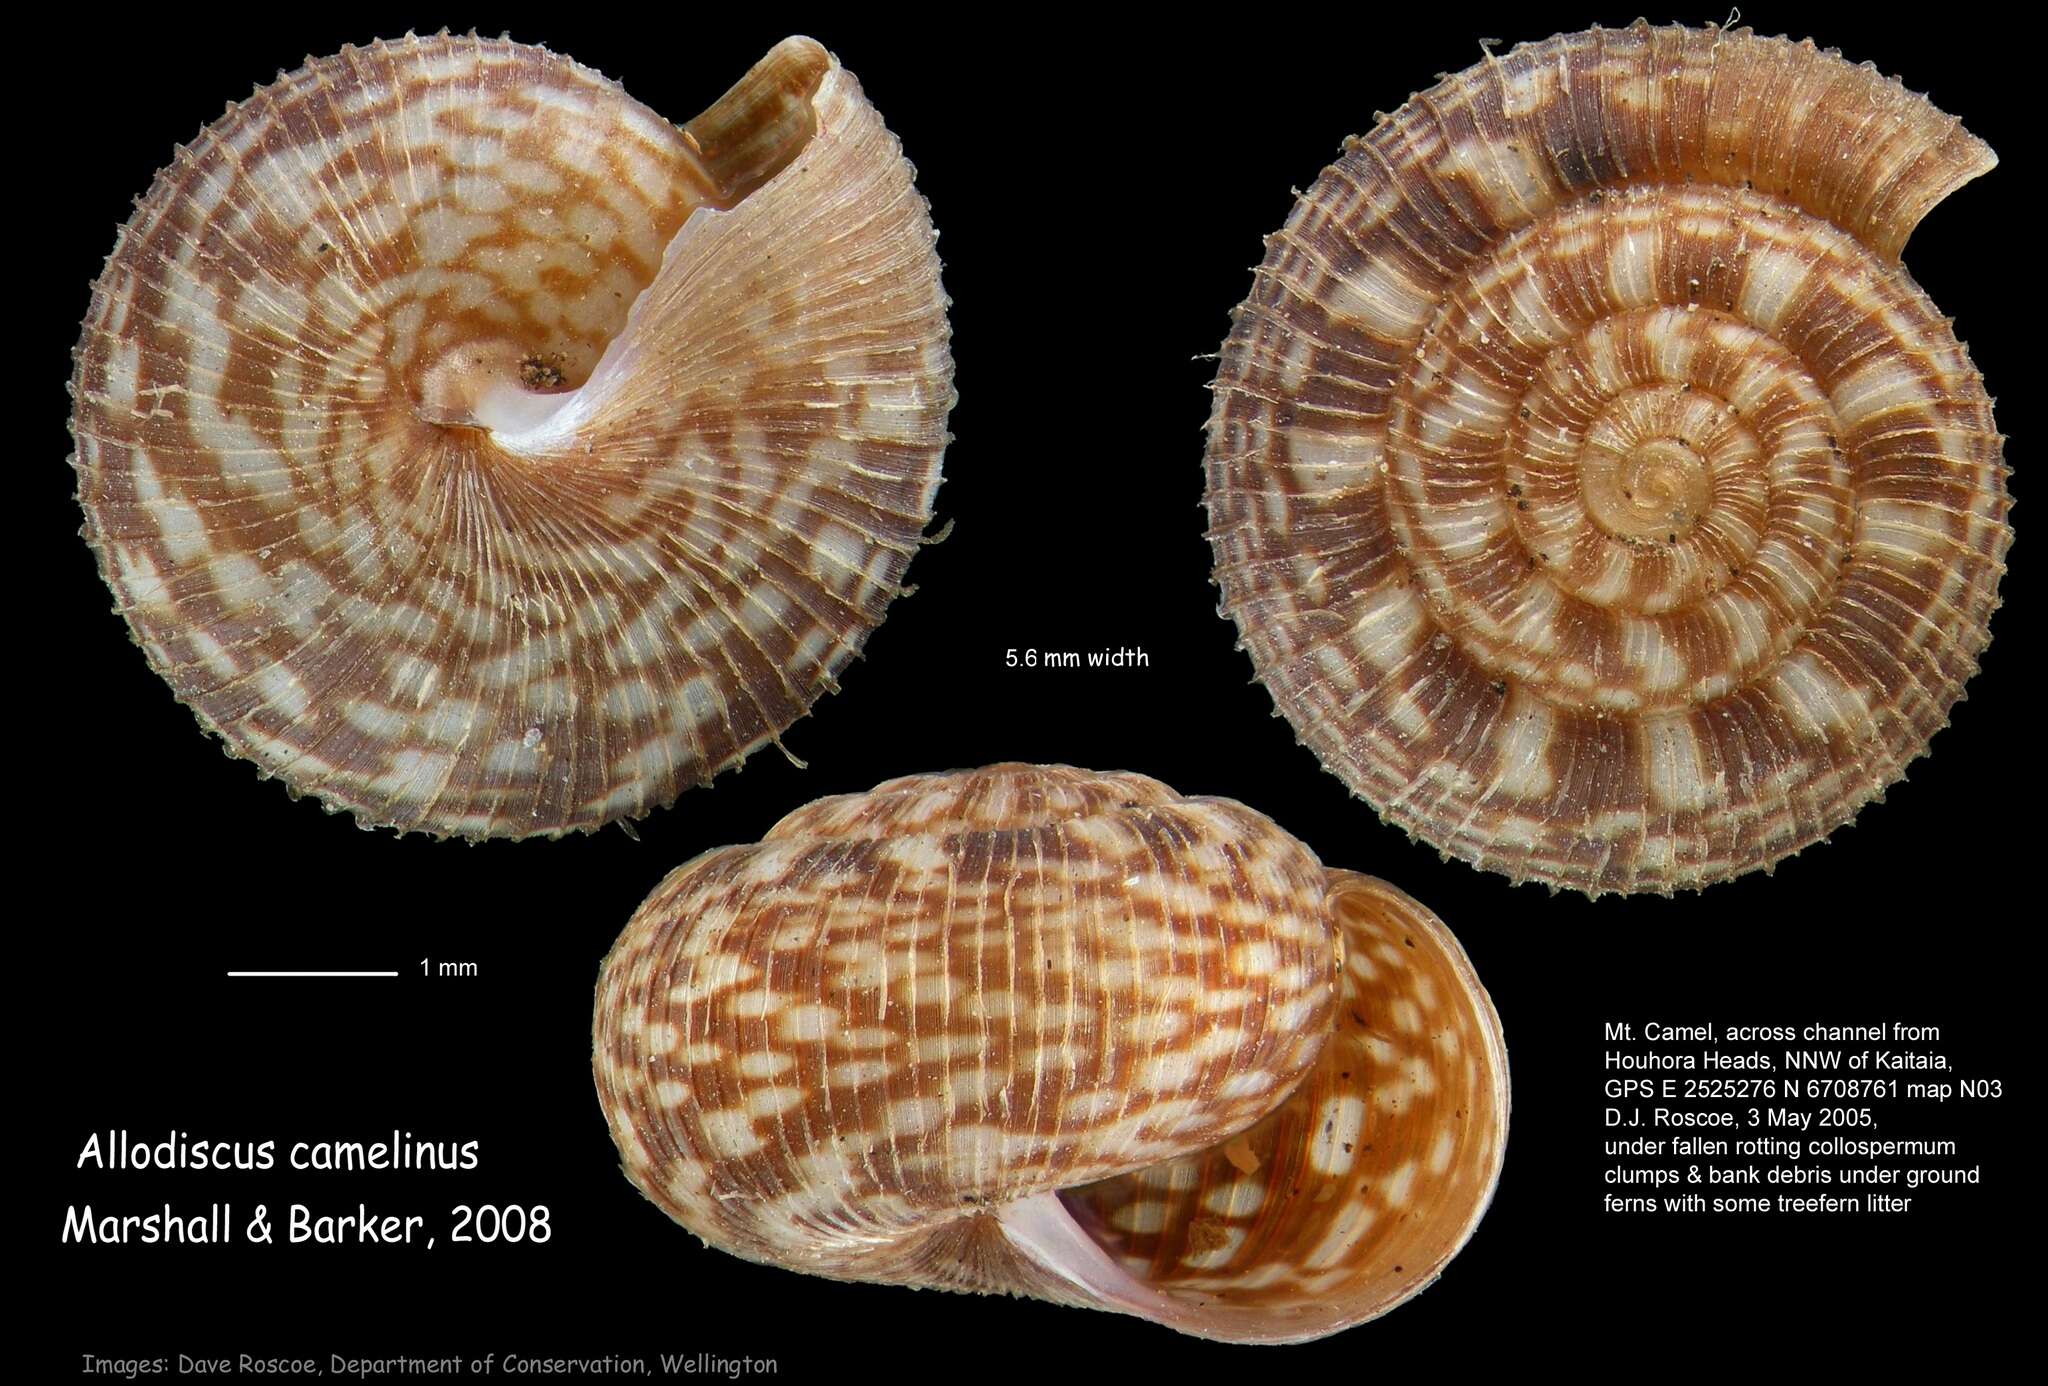 Image of Allodiscus camelinus B. A. Marshall & Barker 2008